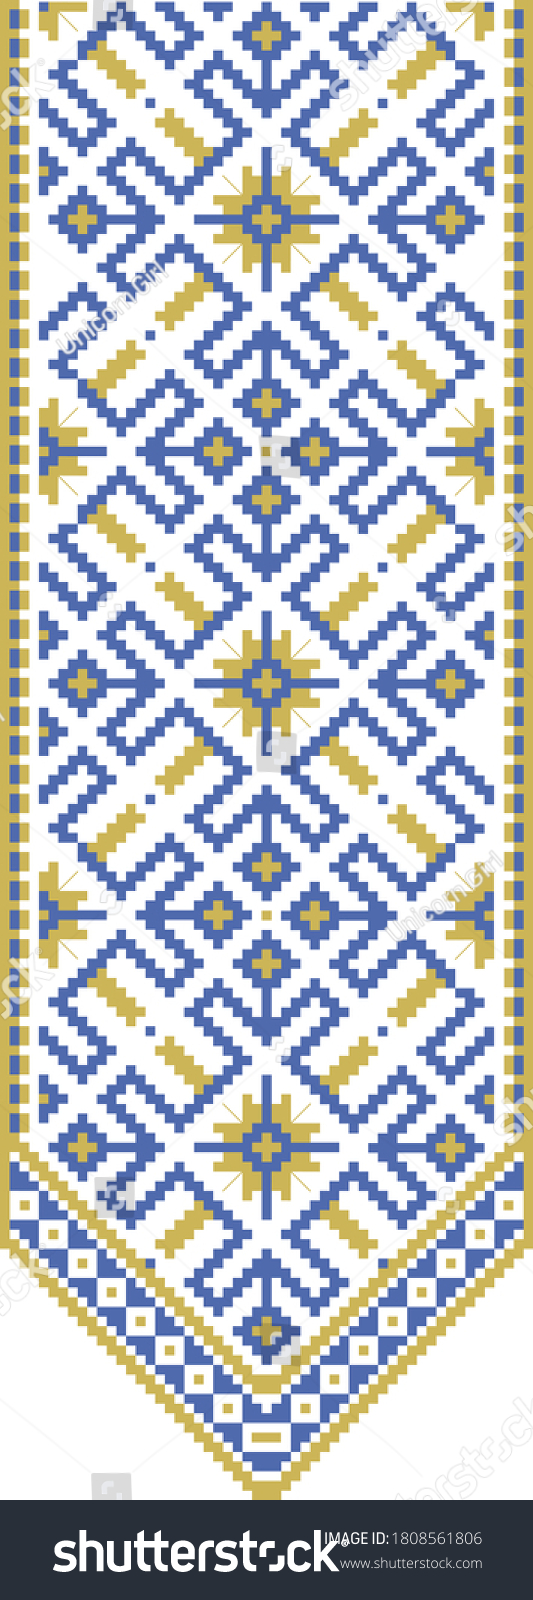 SVG of 
Ukrainian scheme for cross-stitch in blue and yellow svg